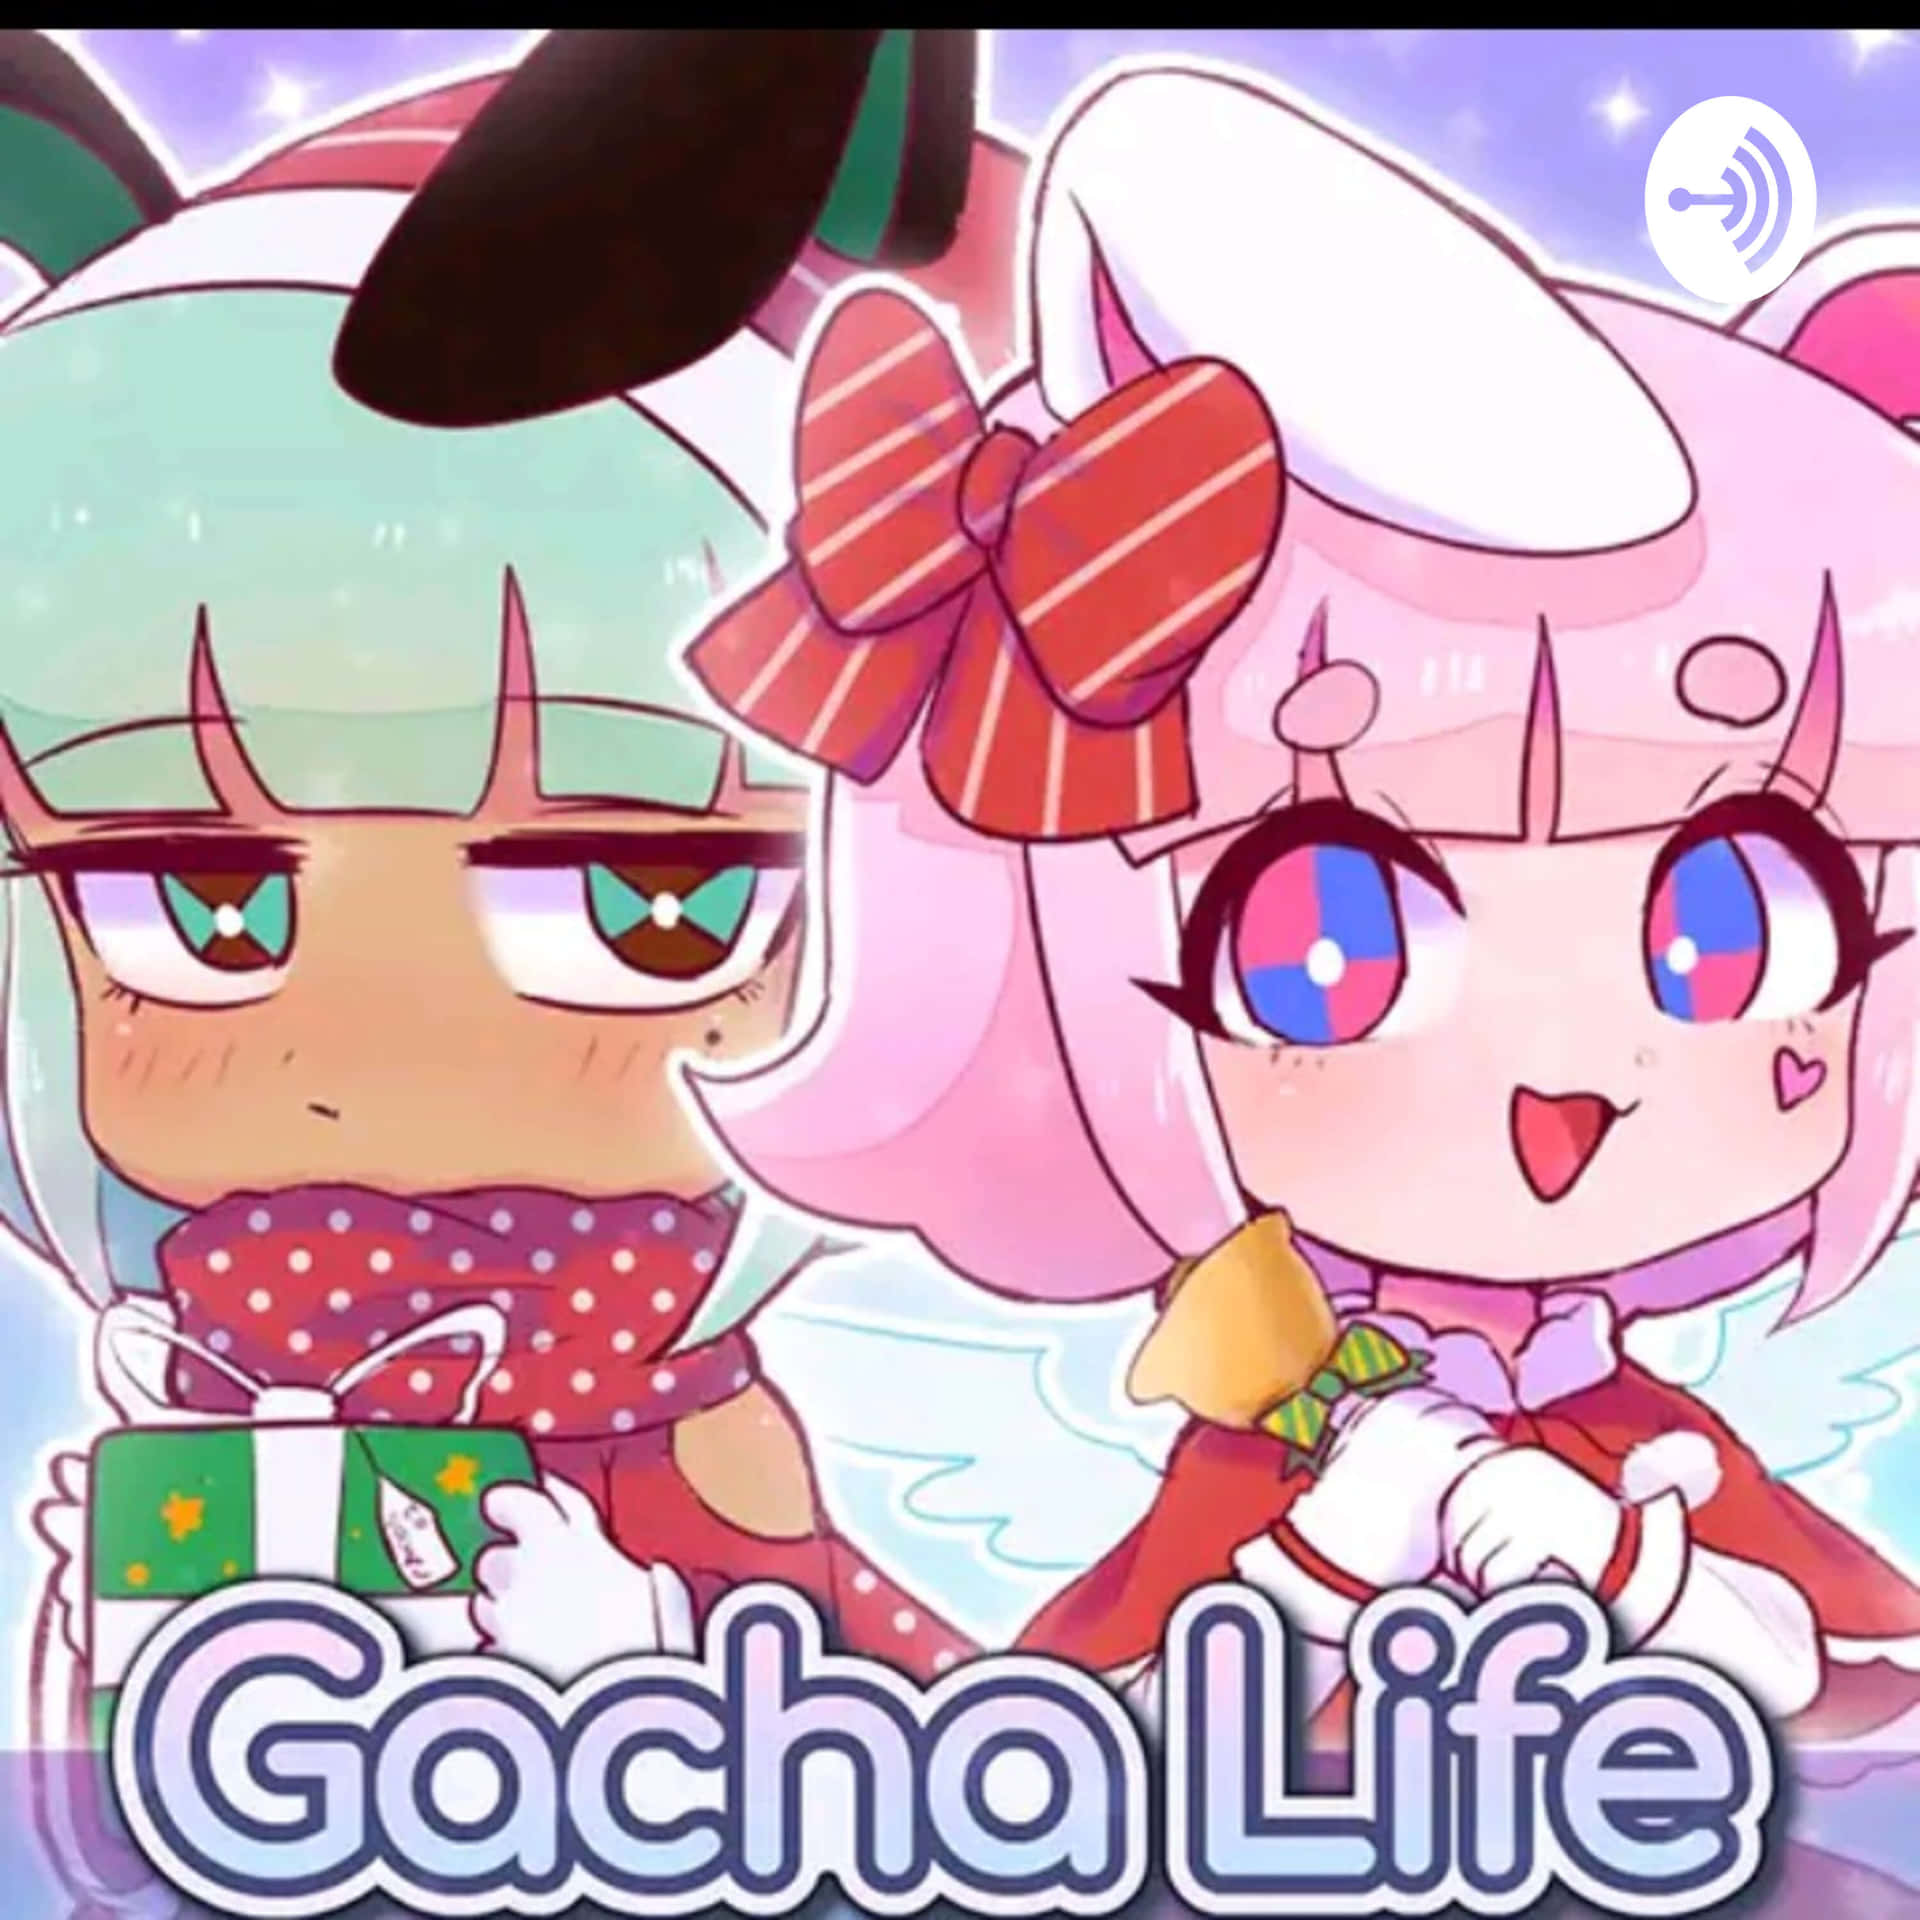 Customize characters and express yourself with Gacha Life